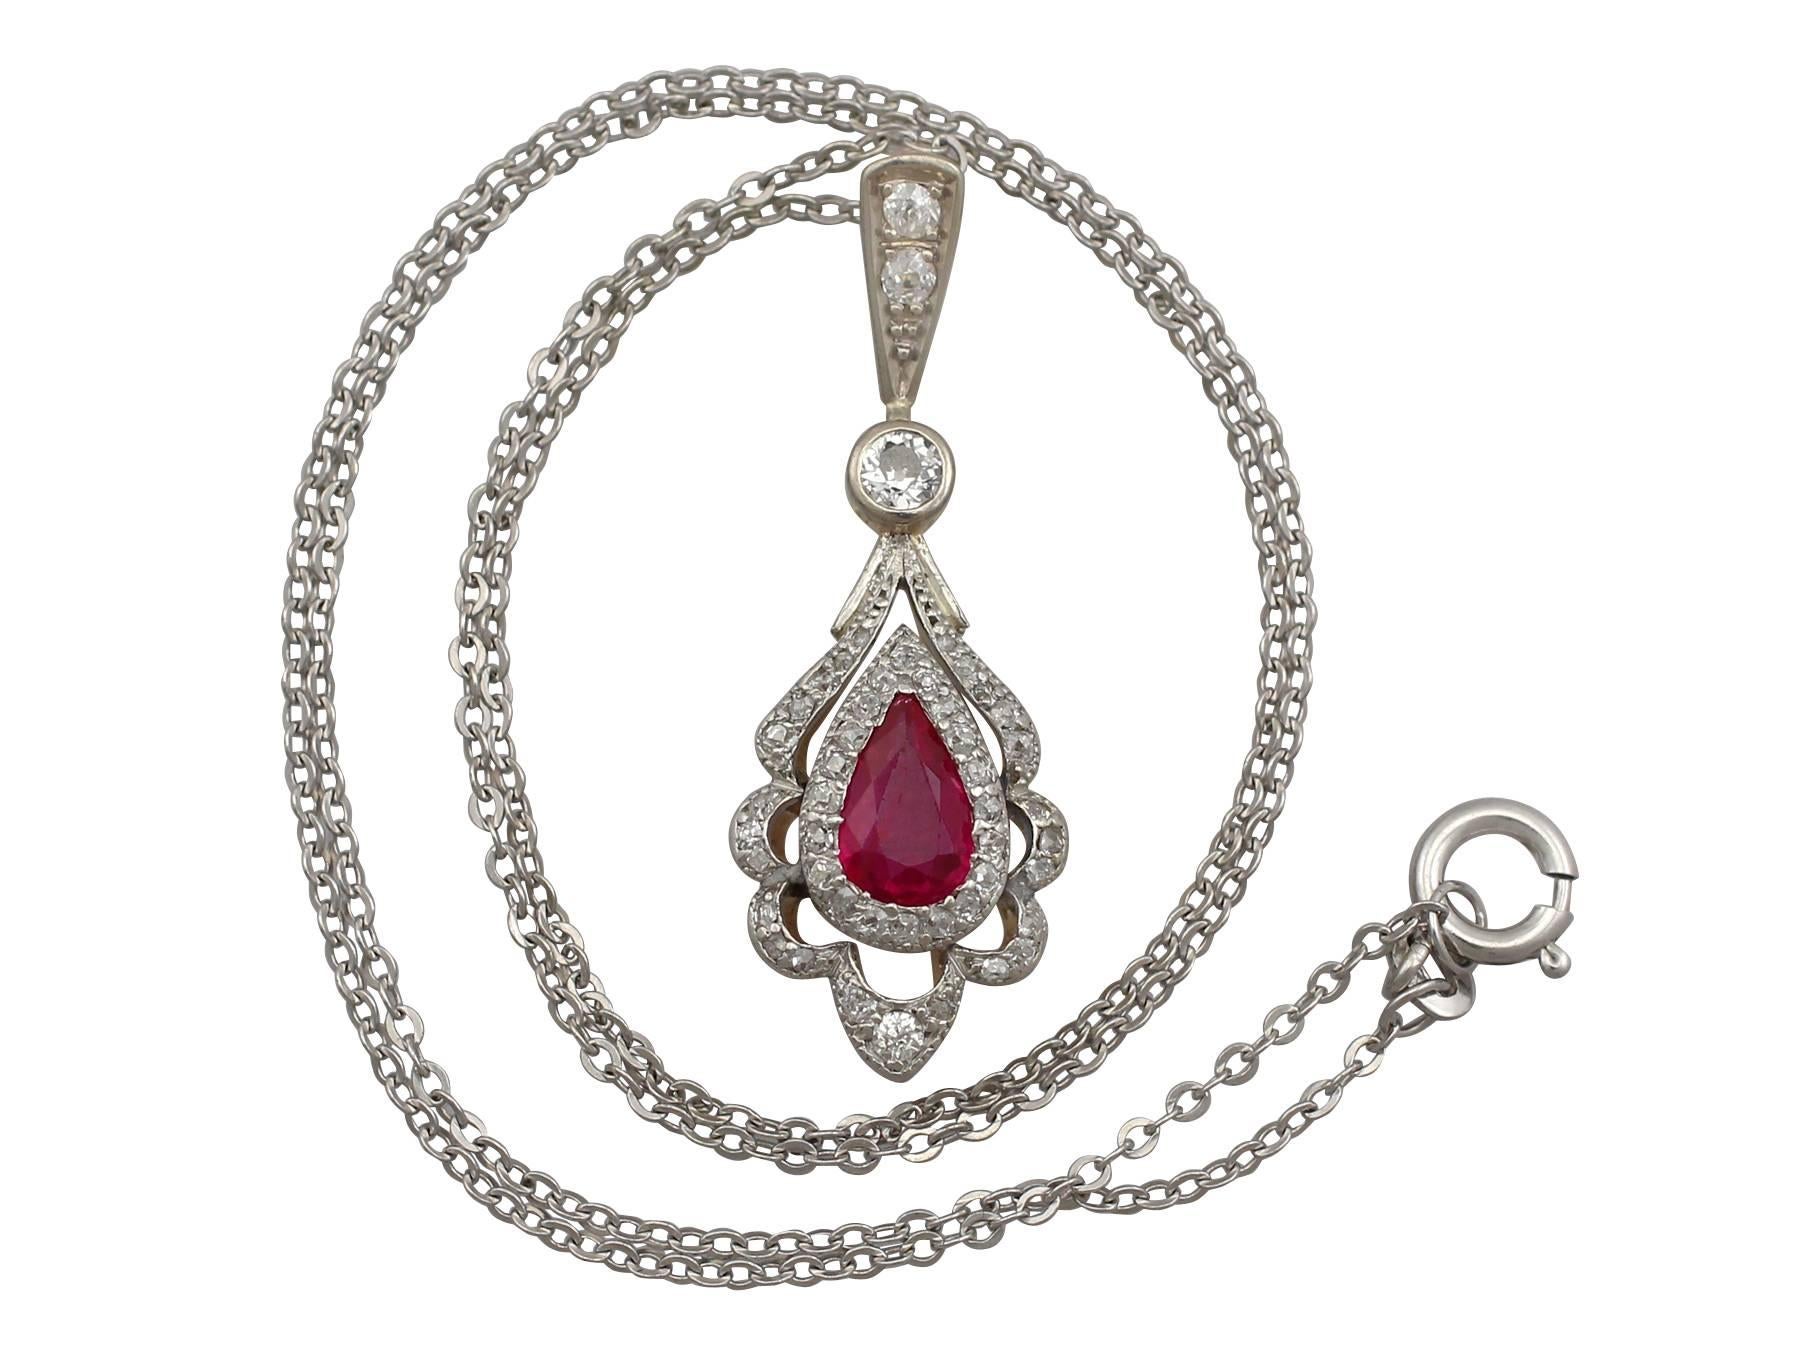 An impressive 0.75 carat pinkish red ruby and 0.37 carat diamond, 18 karat yellow gold and platinum set pendant; part of our diverse antique collections

This fine and impressive diamond and ruby pendant has been crafted in 18 k yellow gold with a